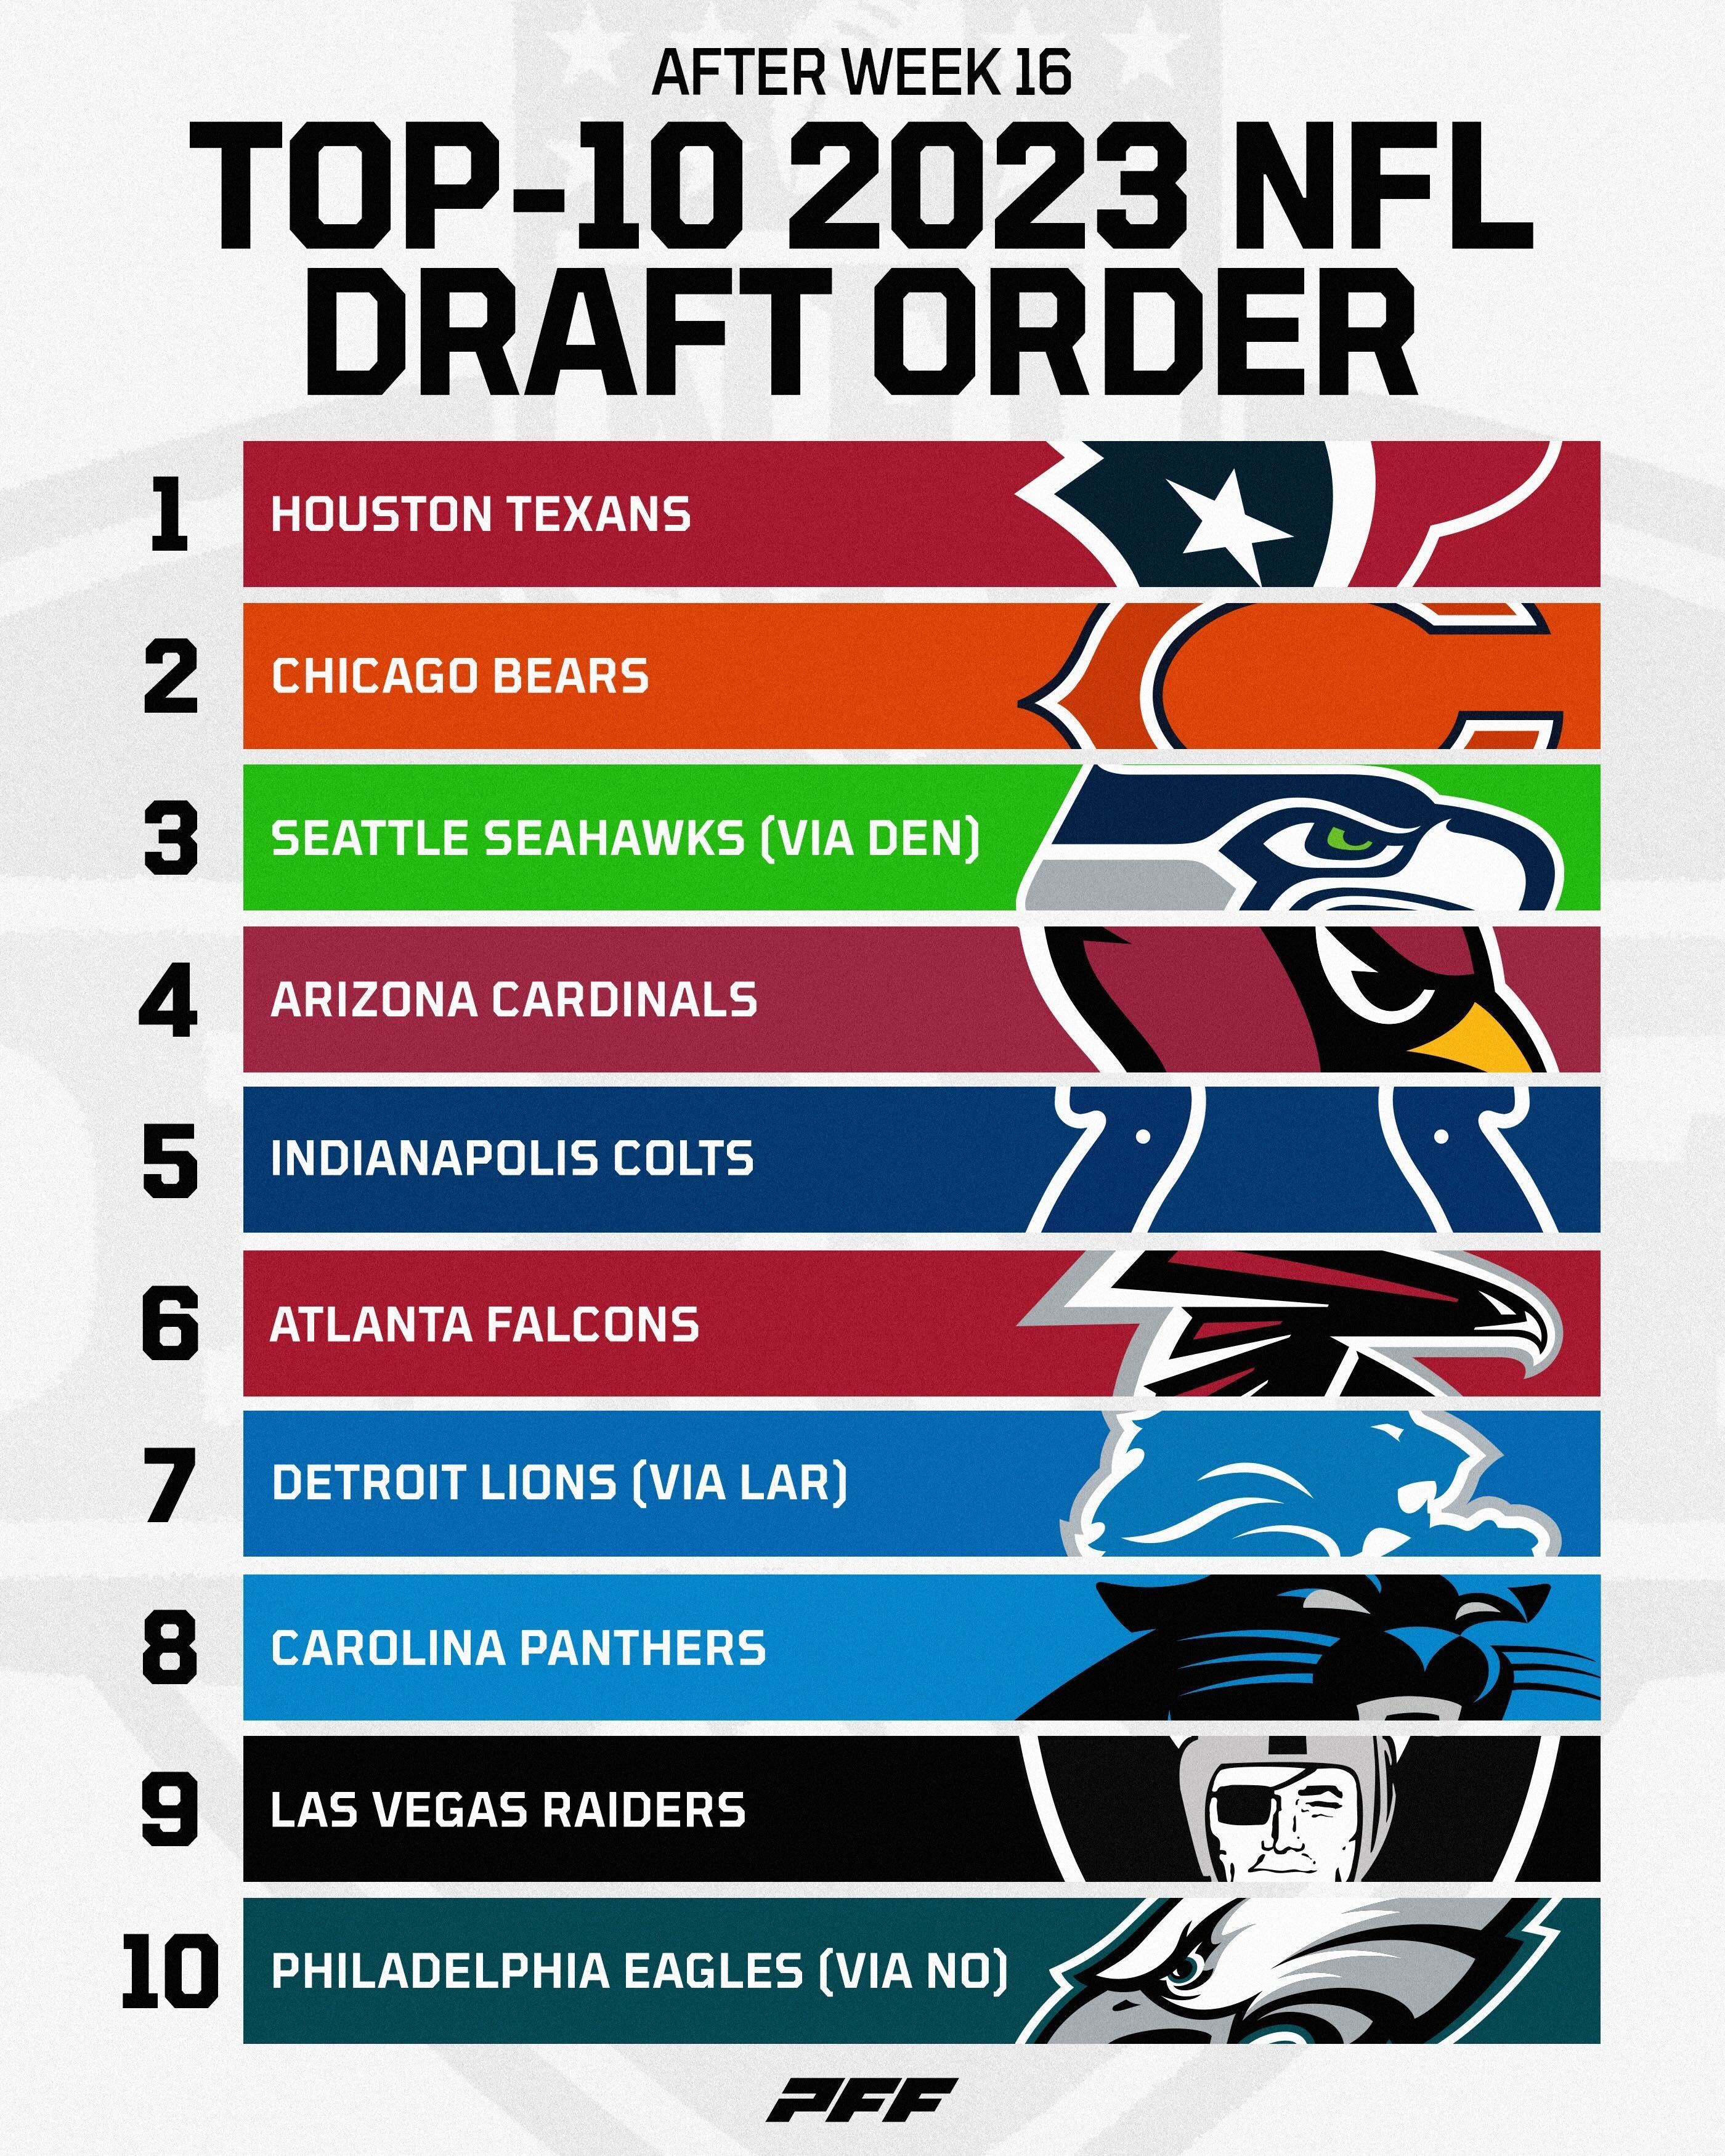 PFF on X: 'The Top-10 2023 NFL Draft order if the season ended today 